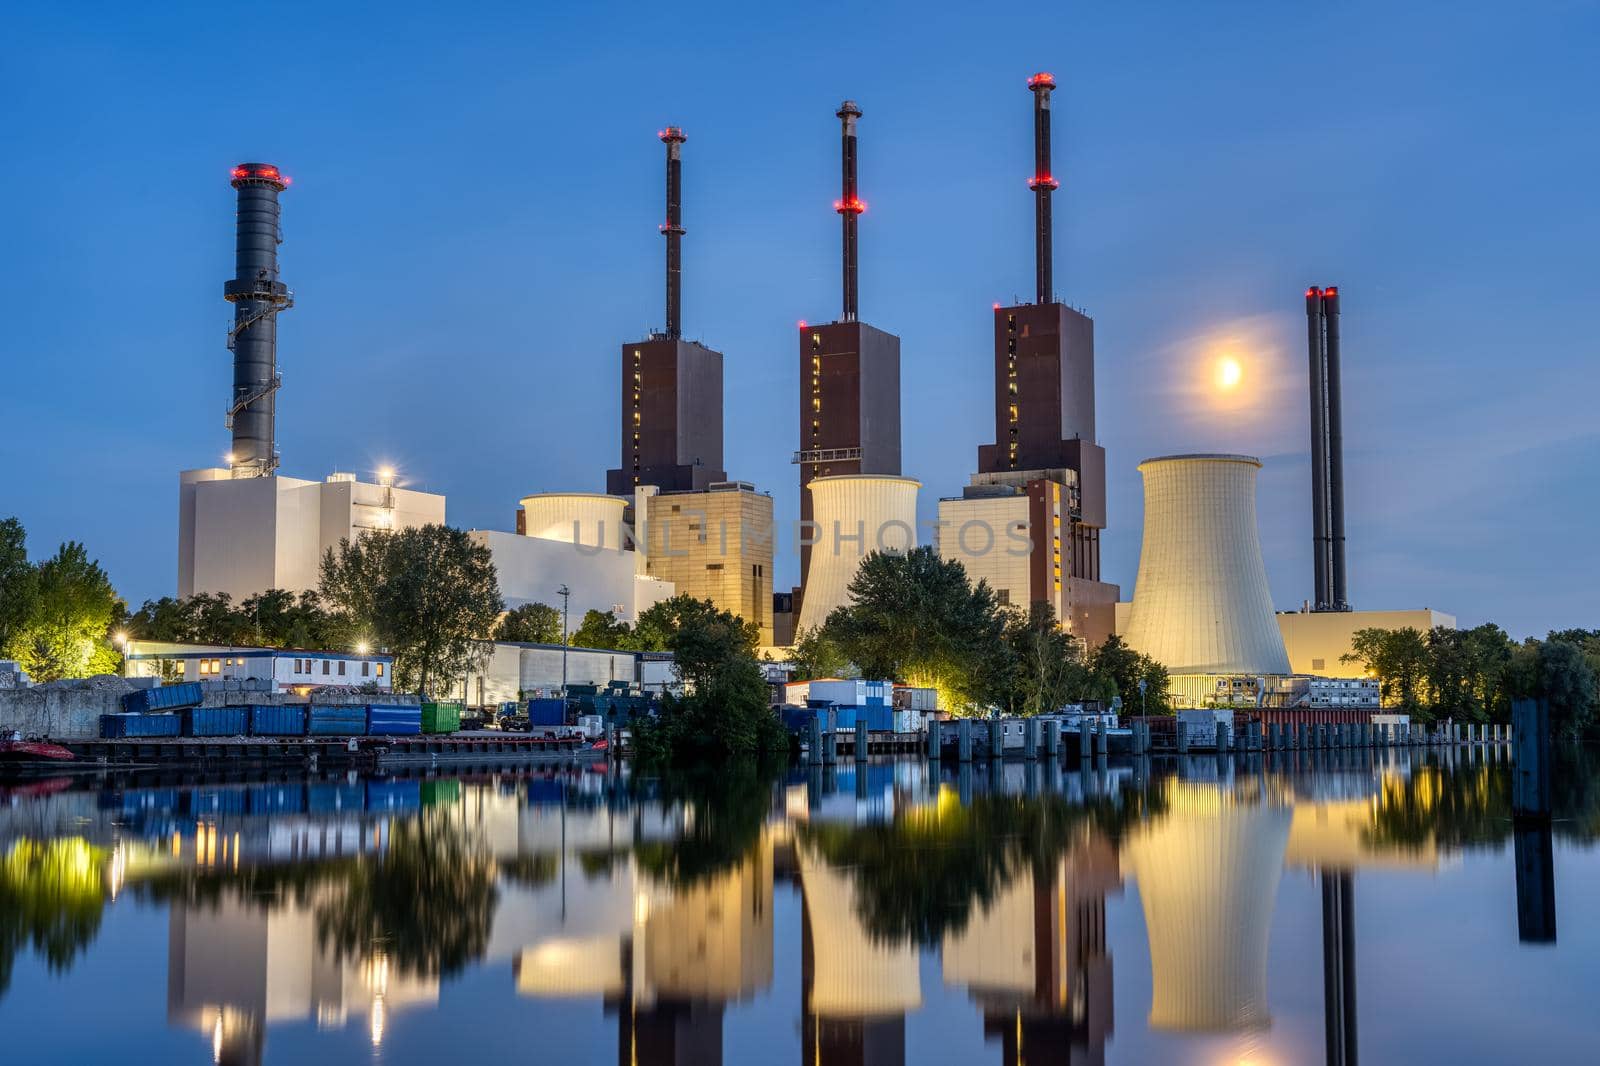 A thermal power station in Berlin at night by elxeneize